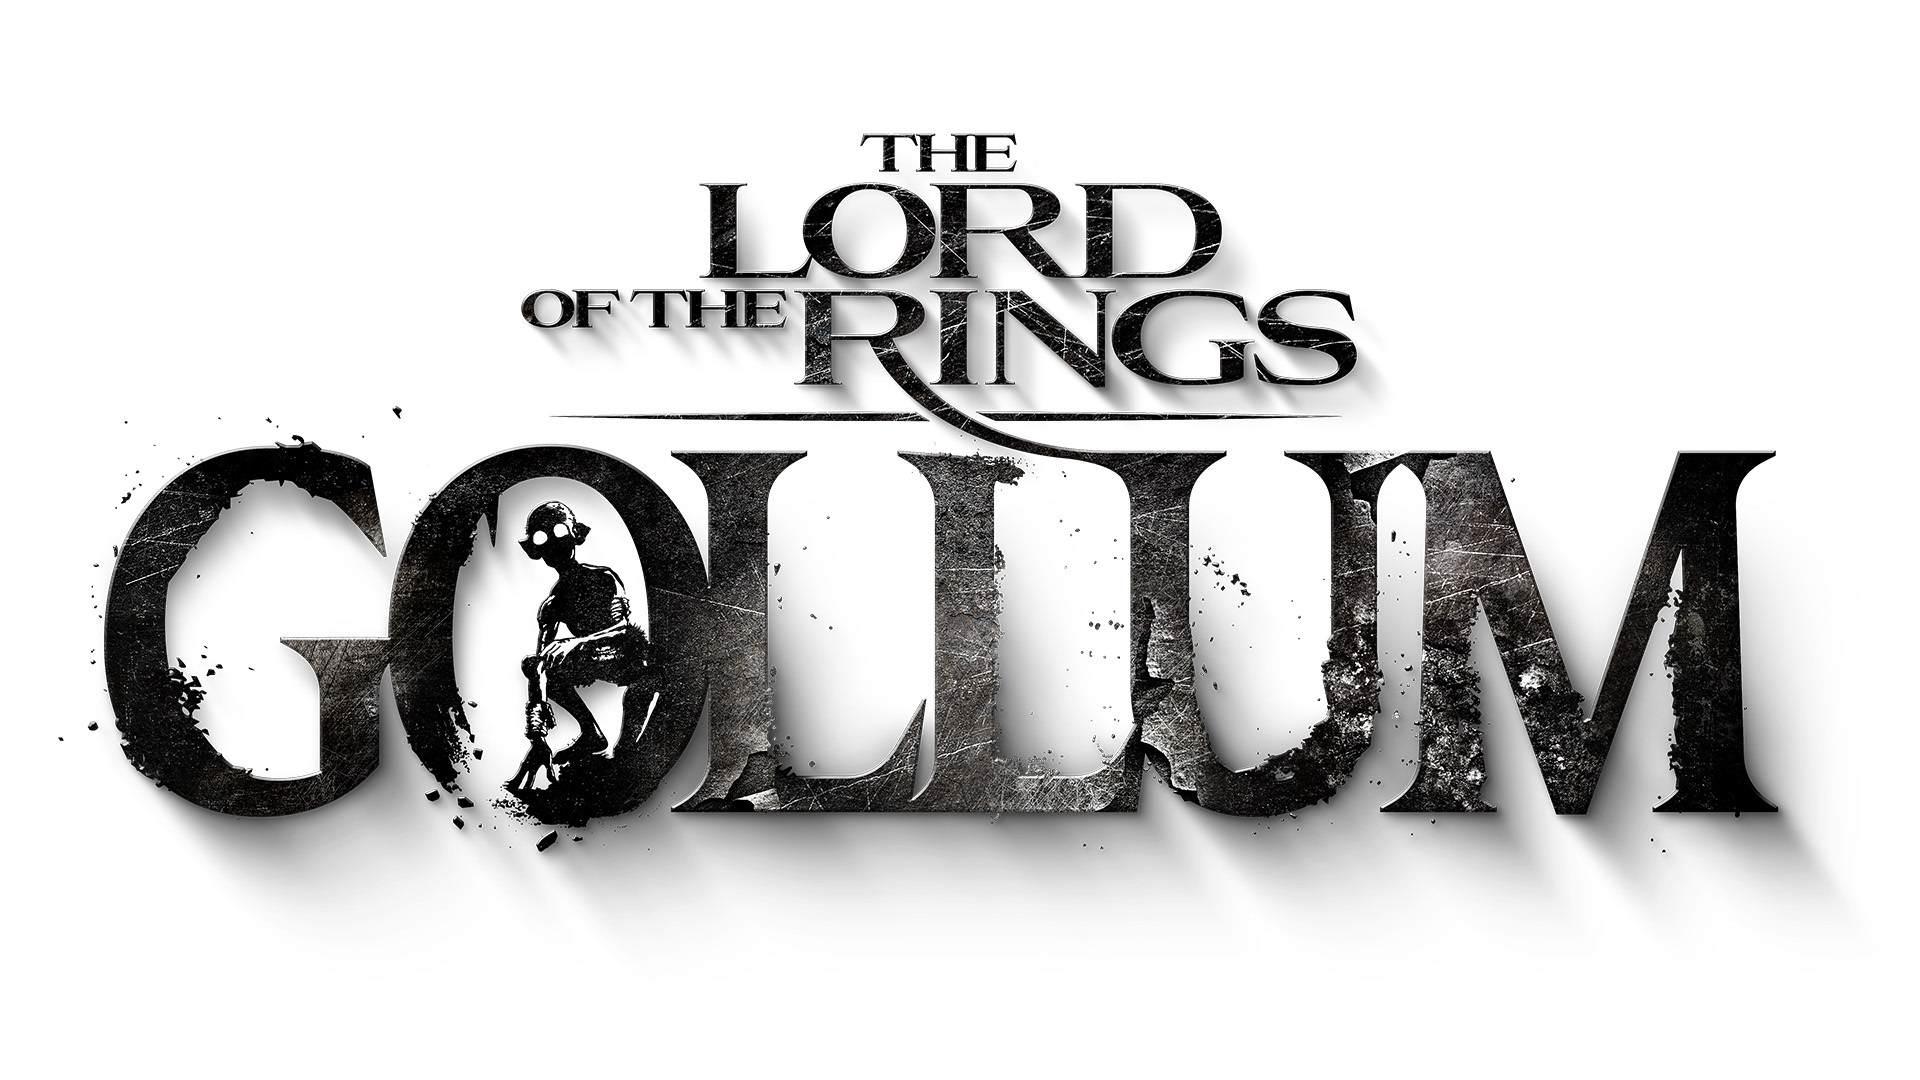 the lord of the rings gollum  Image of the lord of the rings gollum